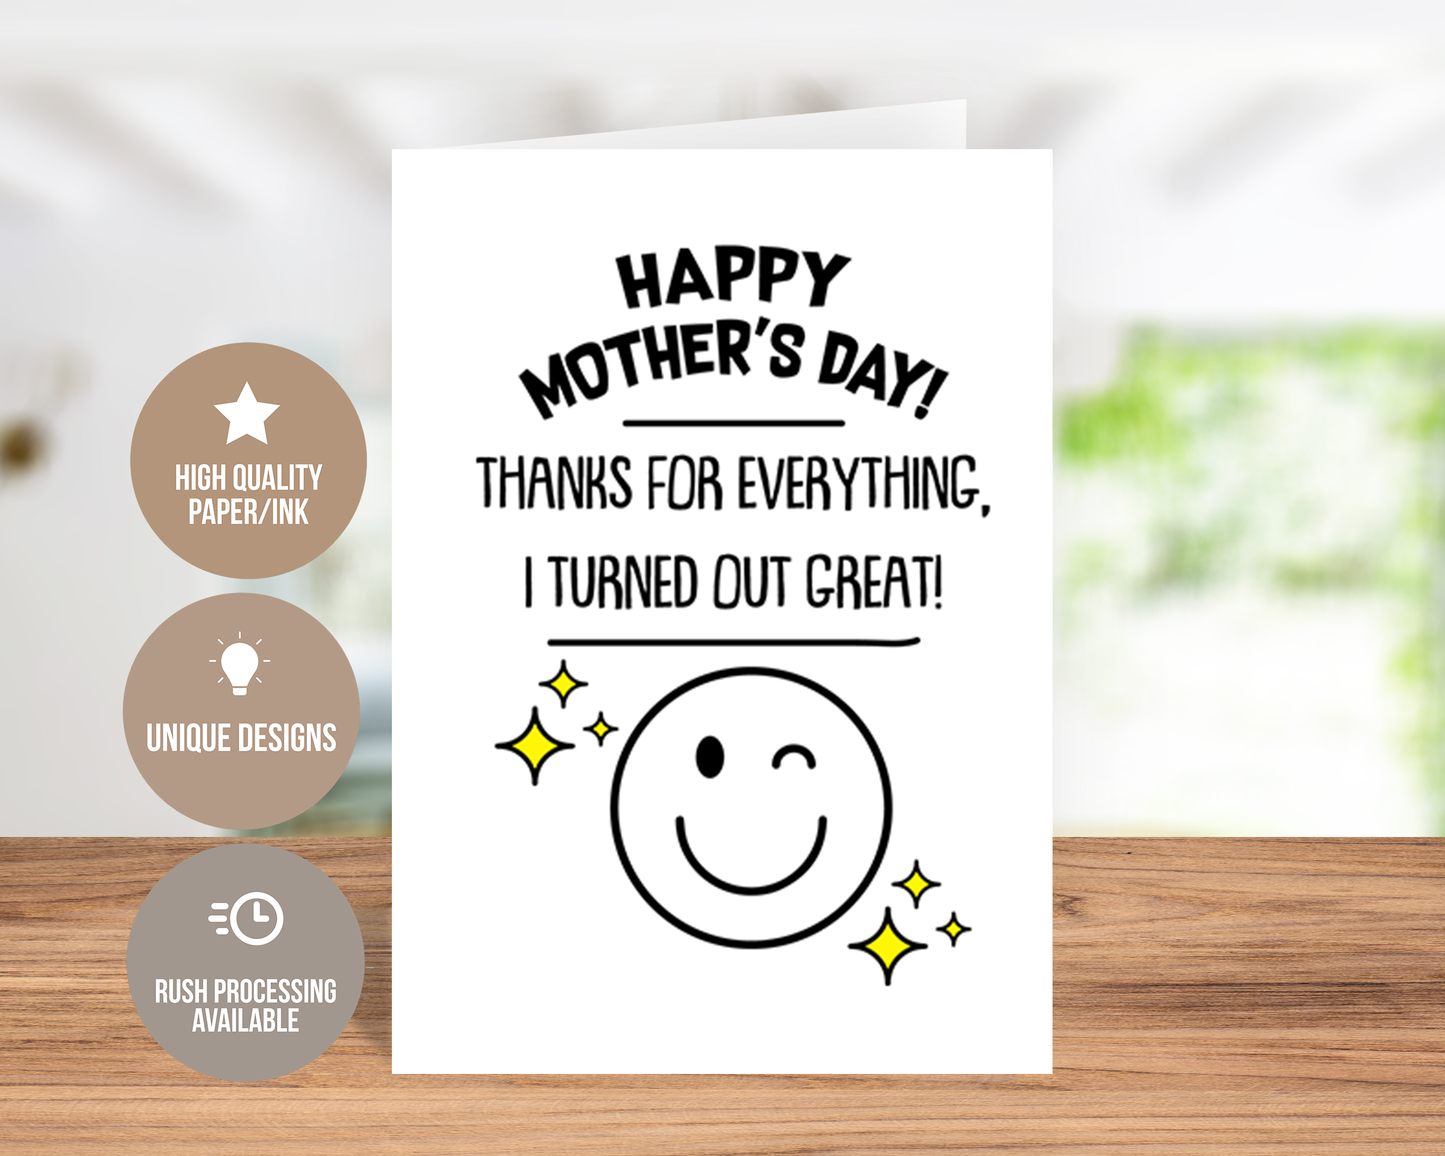 Thanks For Everything, I Turned Out Great! Mother's Day Card